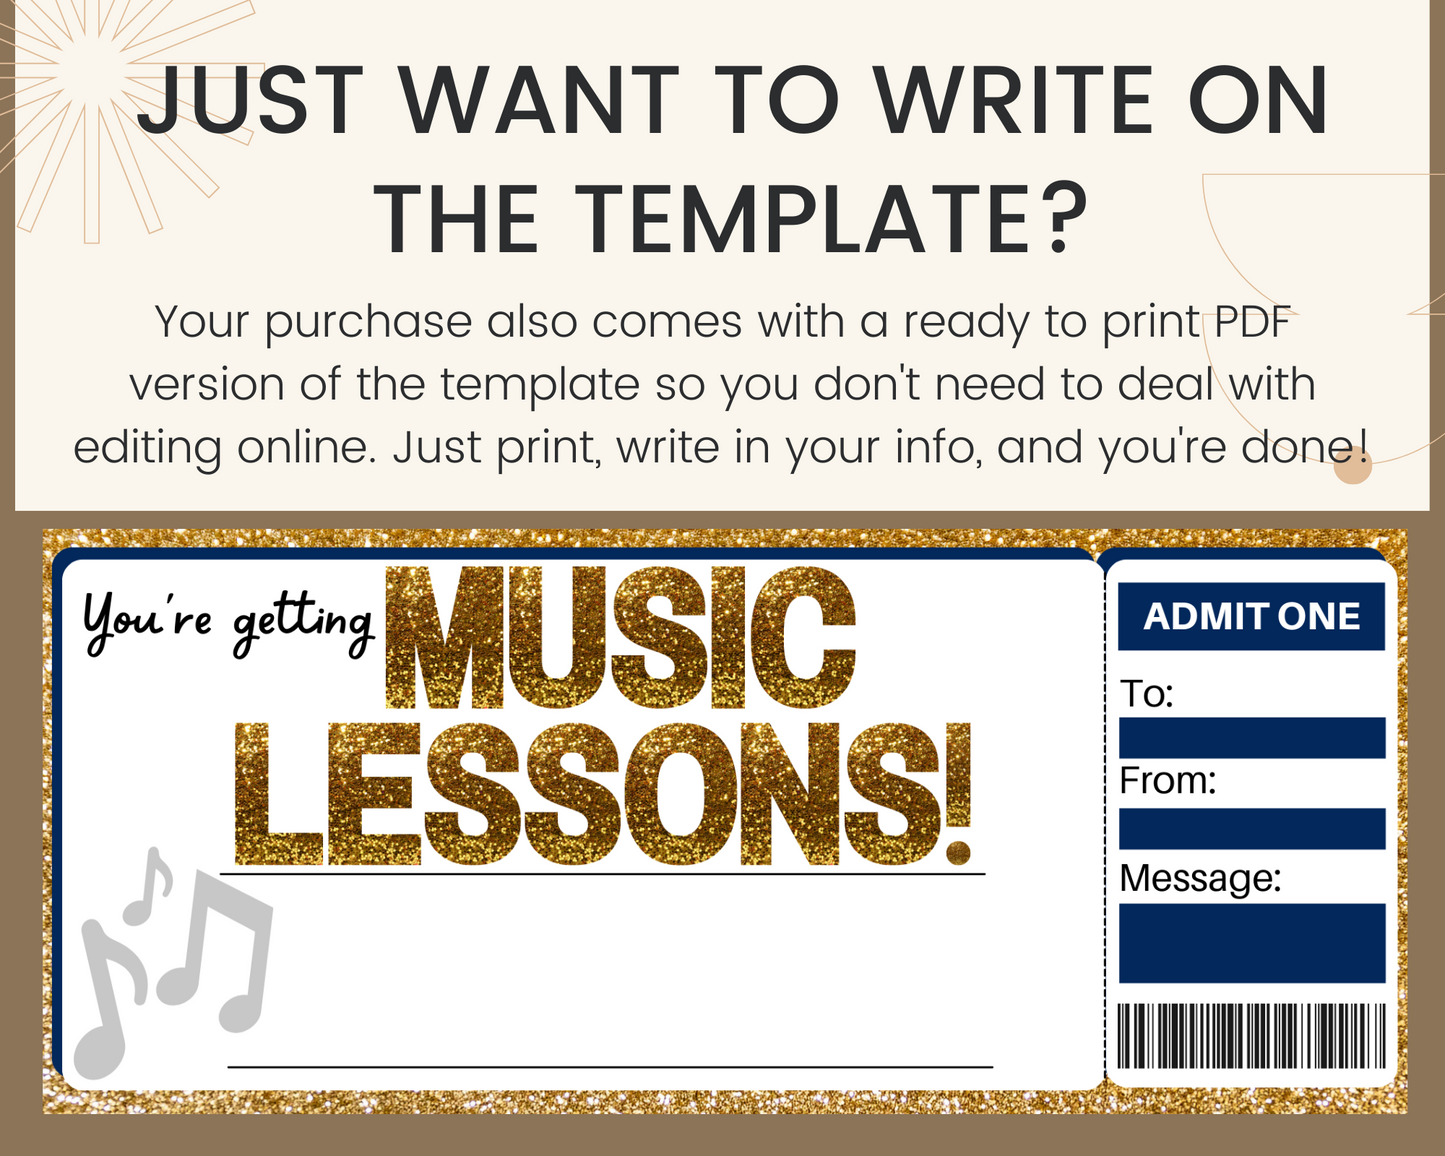 Music Lessons Gift Certificate